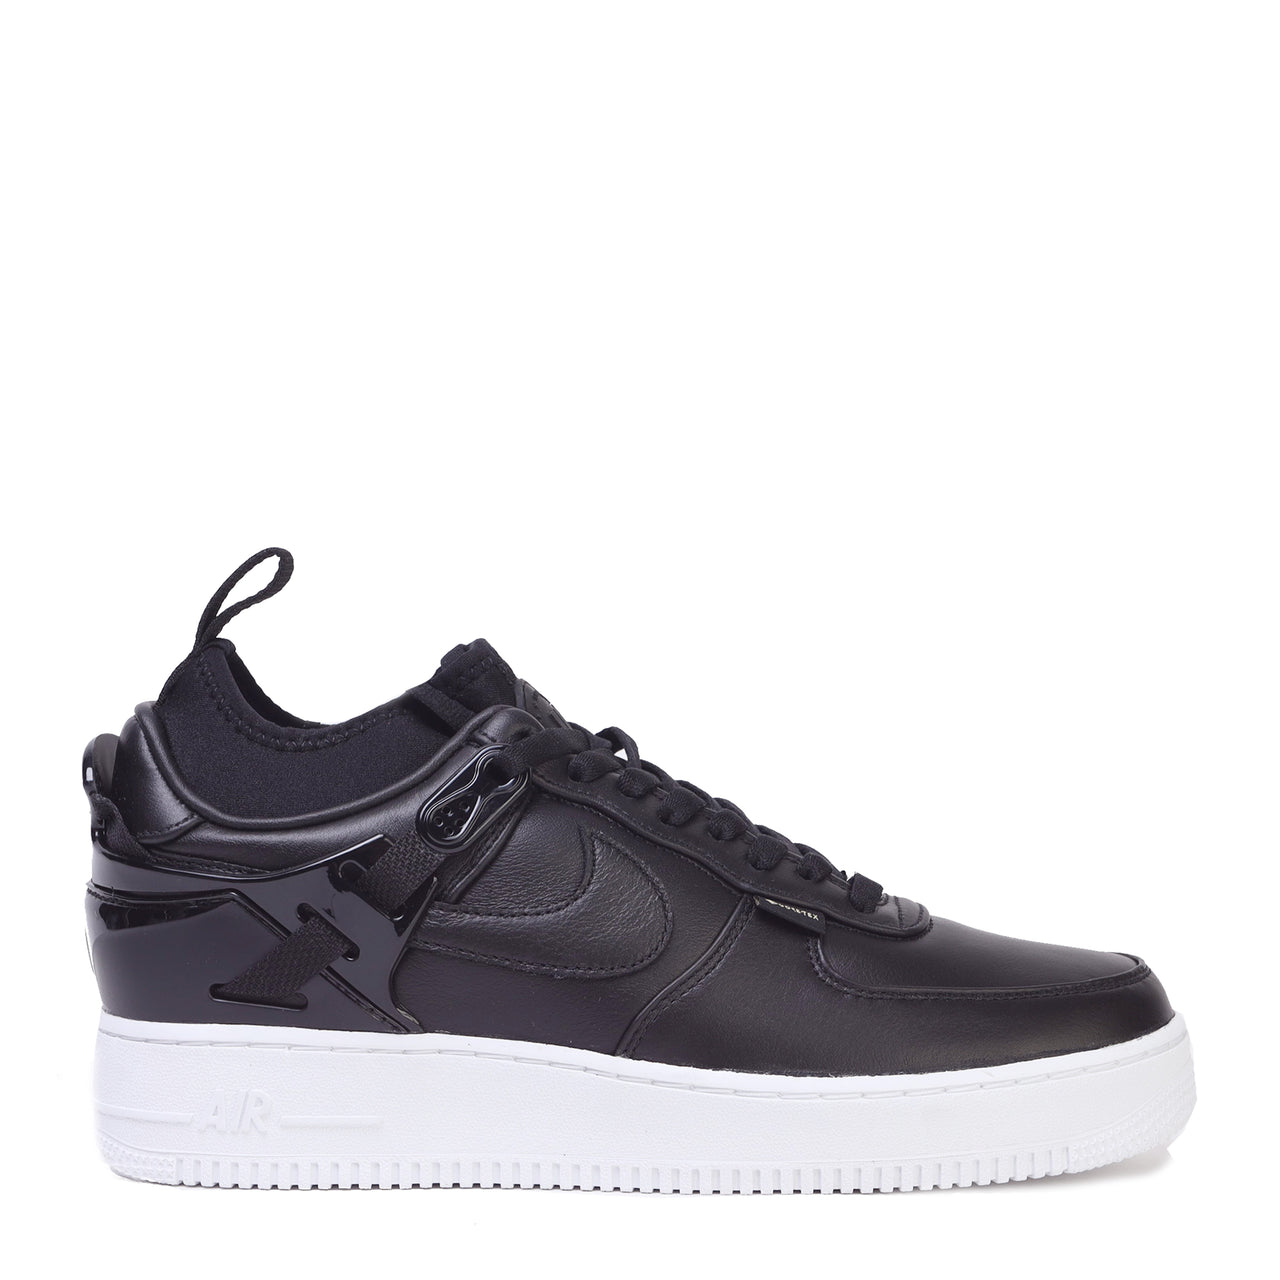 Nike Air Force 1 '07 Lv8 Utility Poor man's Off-white